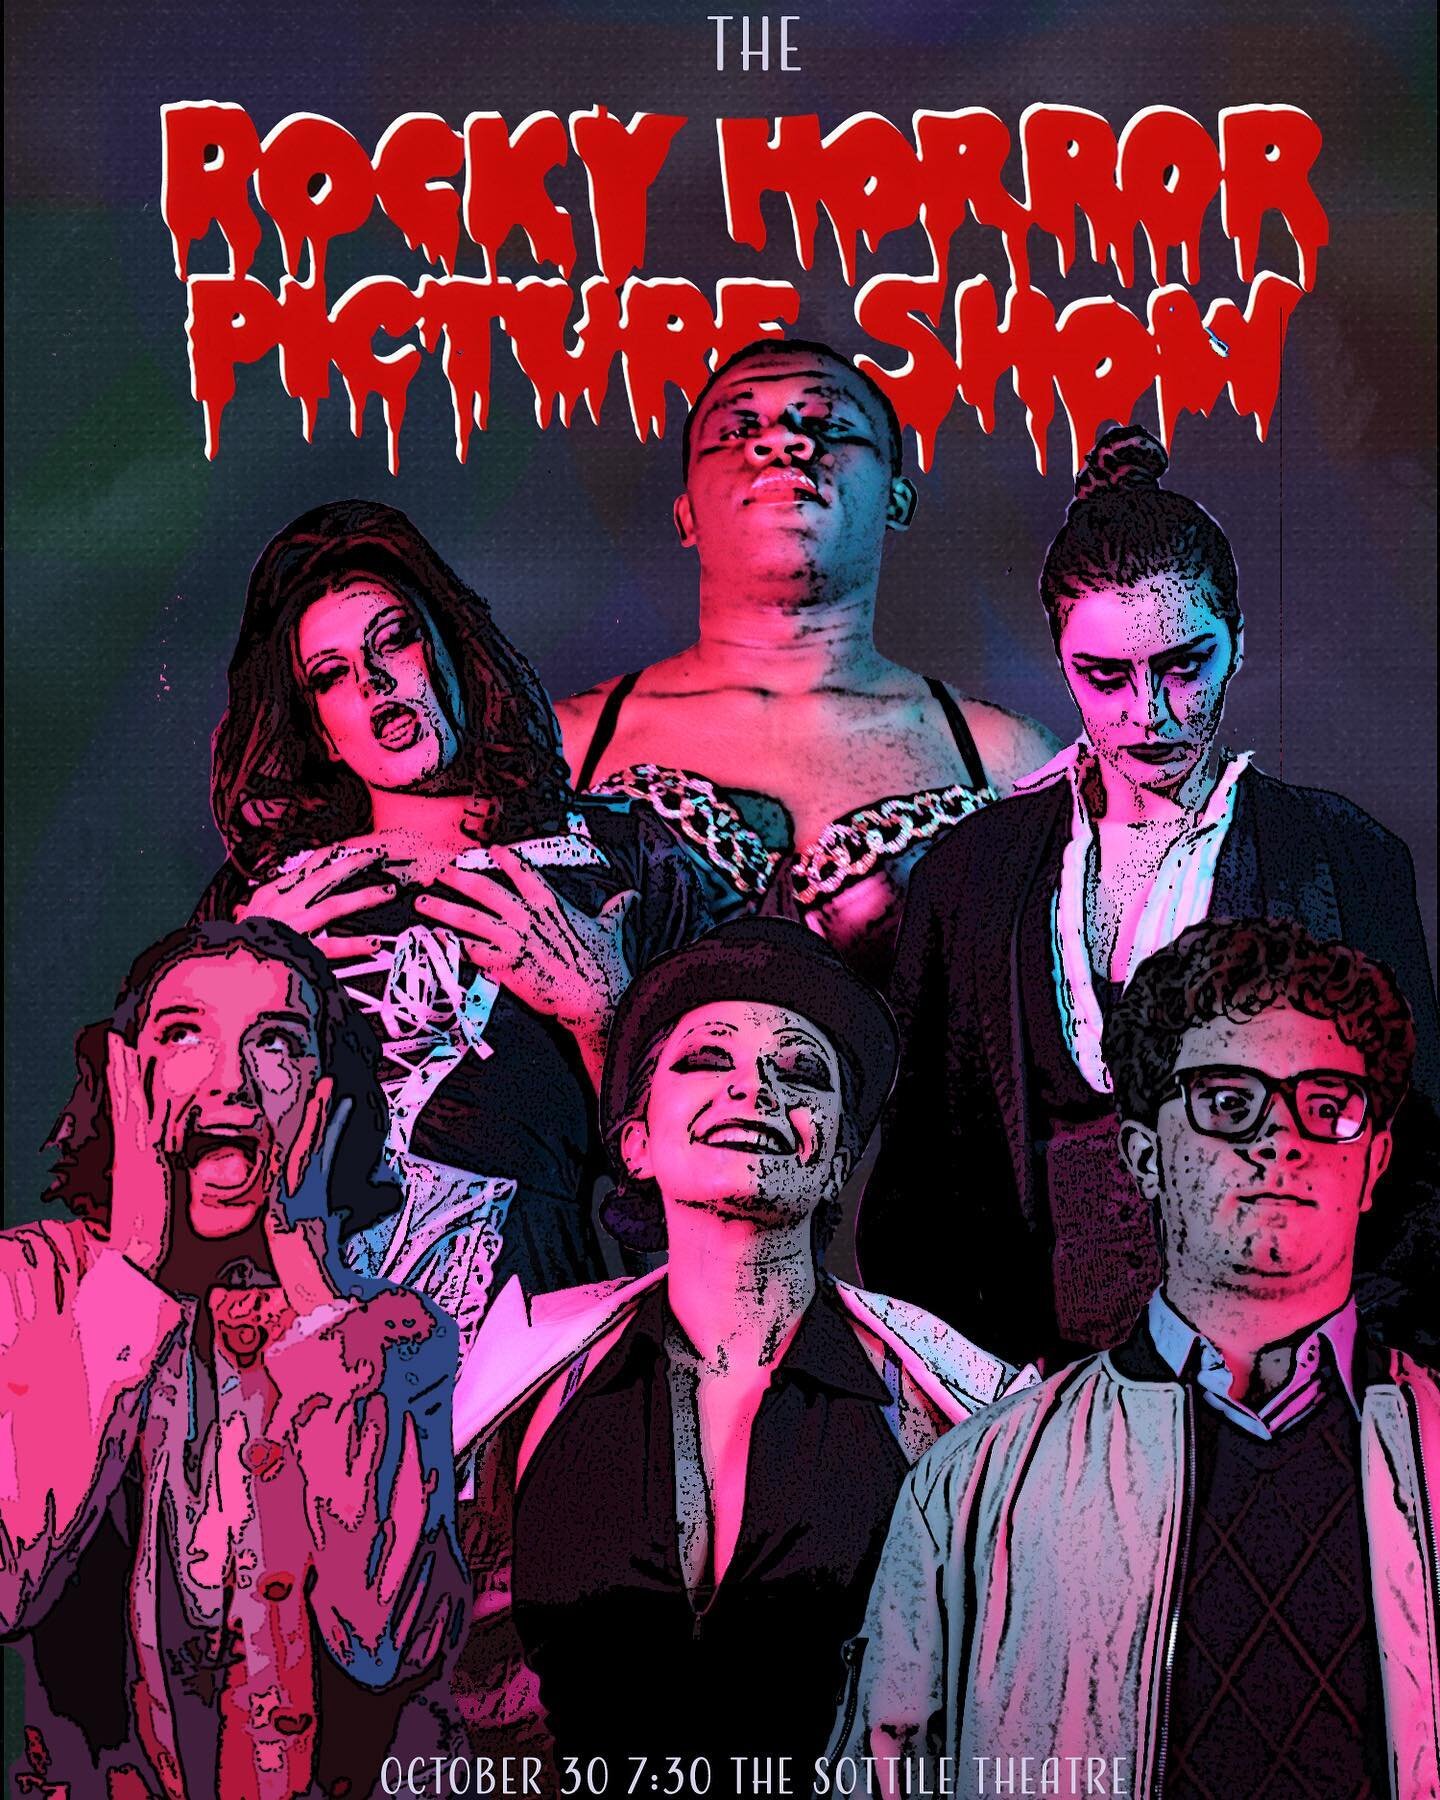 ROCKY HORROR ONE NIGHT ONLY

Ticket link in bio.

Director: @joey___kirkman 
Choreographer: @g.durbs
Costume design: Ryan Frye
Hair and makeup design: @ardenmcneill 
Photography and marketing: @annmorraye